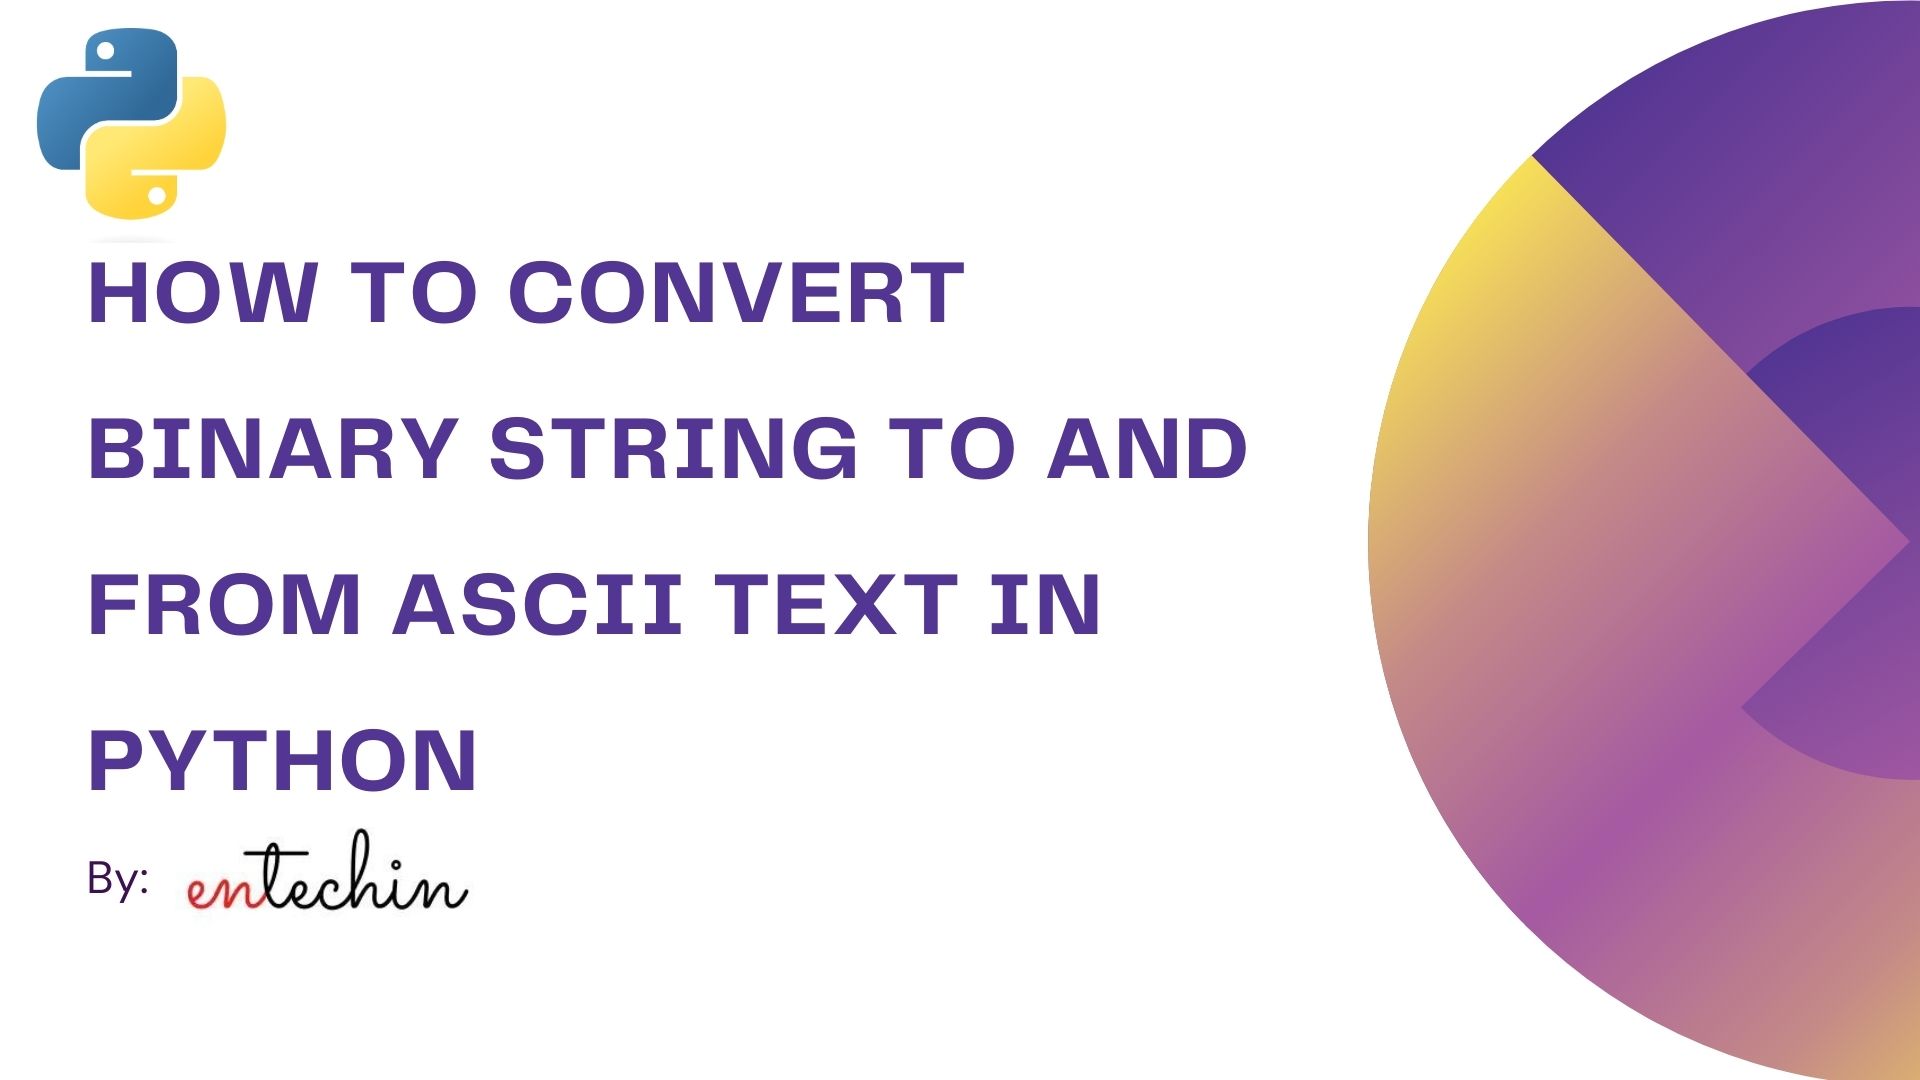 How to convert binary string to and from ASCII text in Python